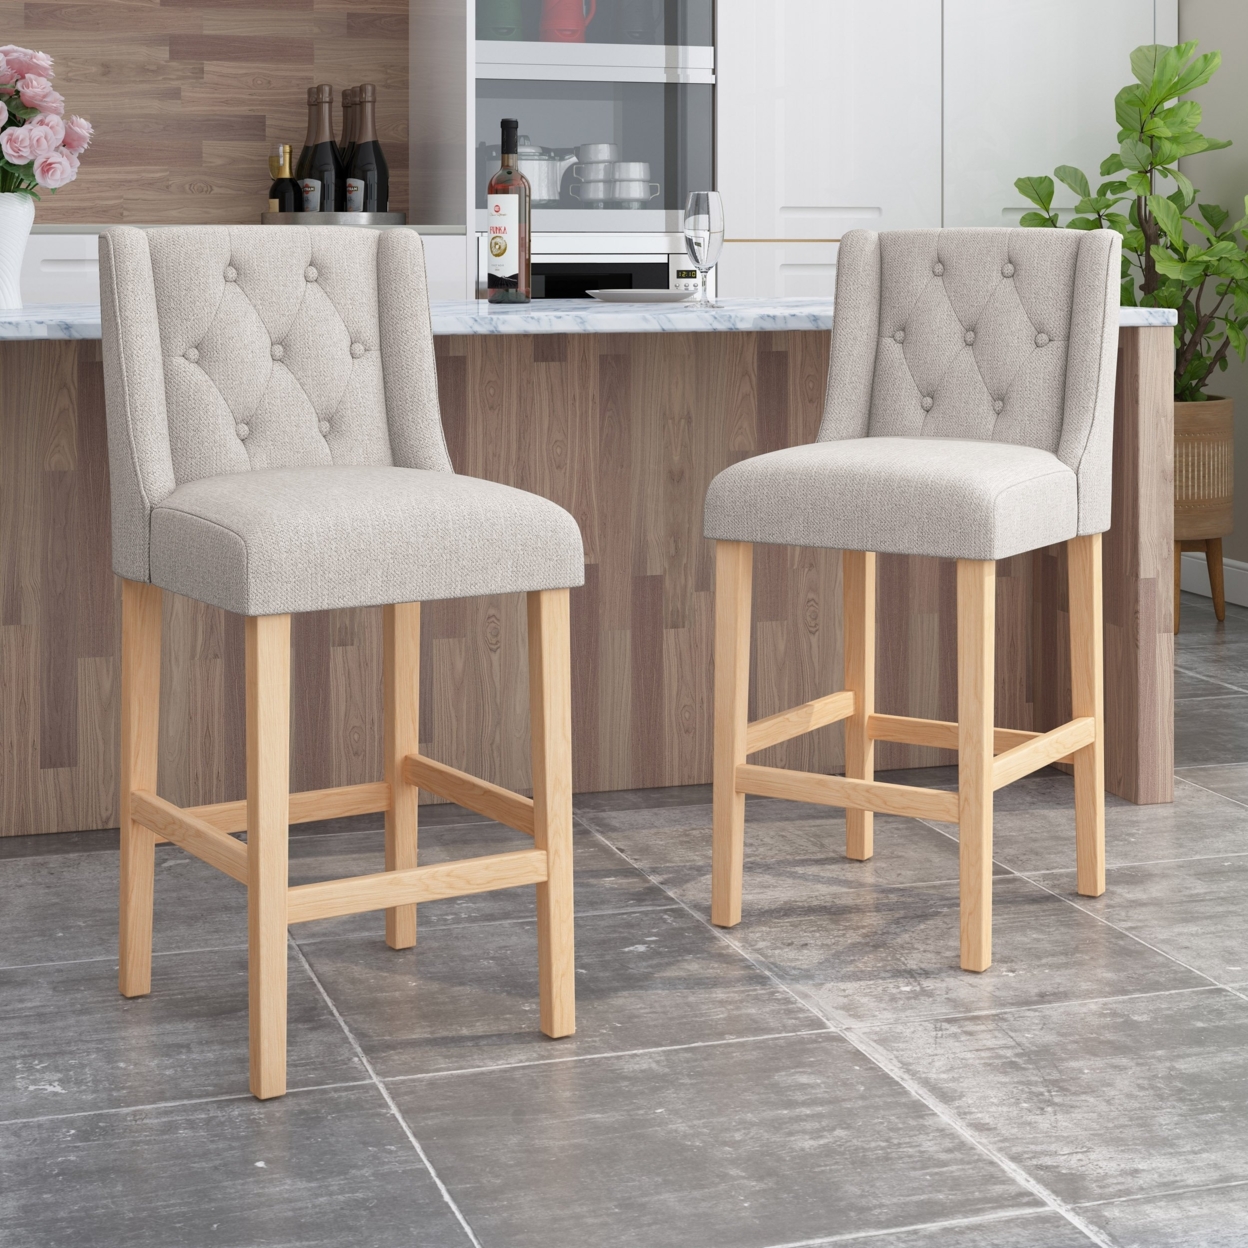 Zaydrian Button Tufted Fabric Wingback Bar Stool (Set Of 2) - Light Gray